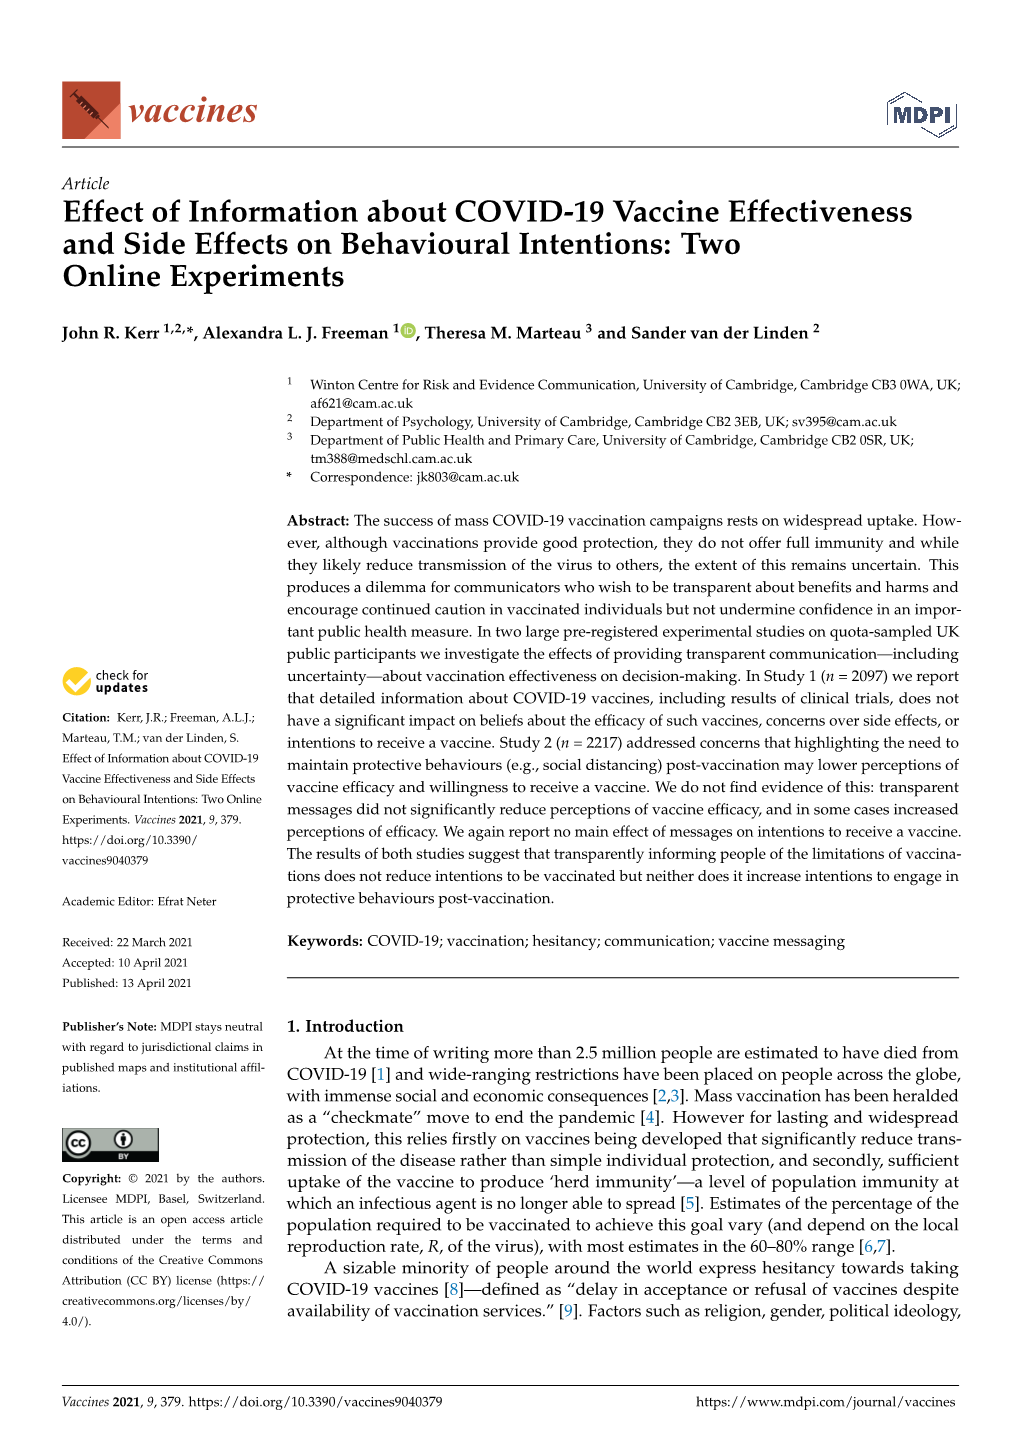 Effect of Information About COVID-19 Vaccine Effectiveness and Side Effects on Behavioural Intentions: Two Online Experiments